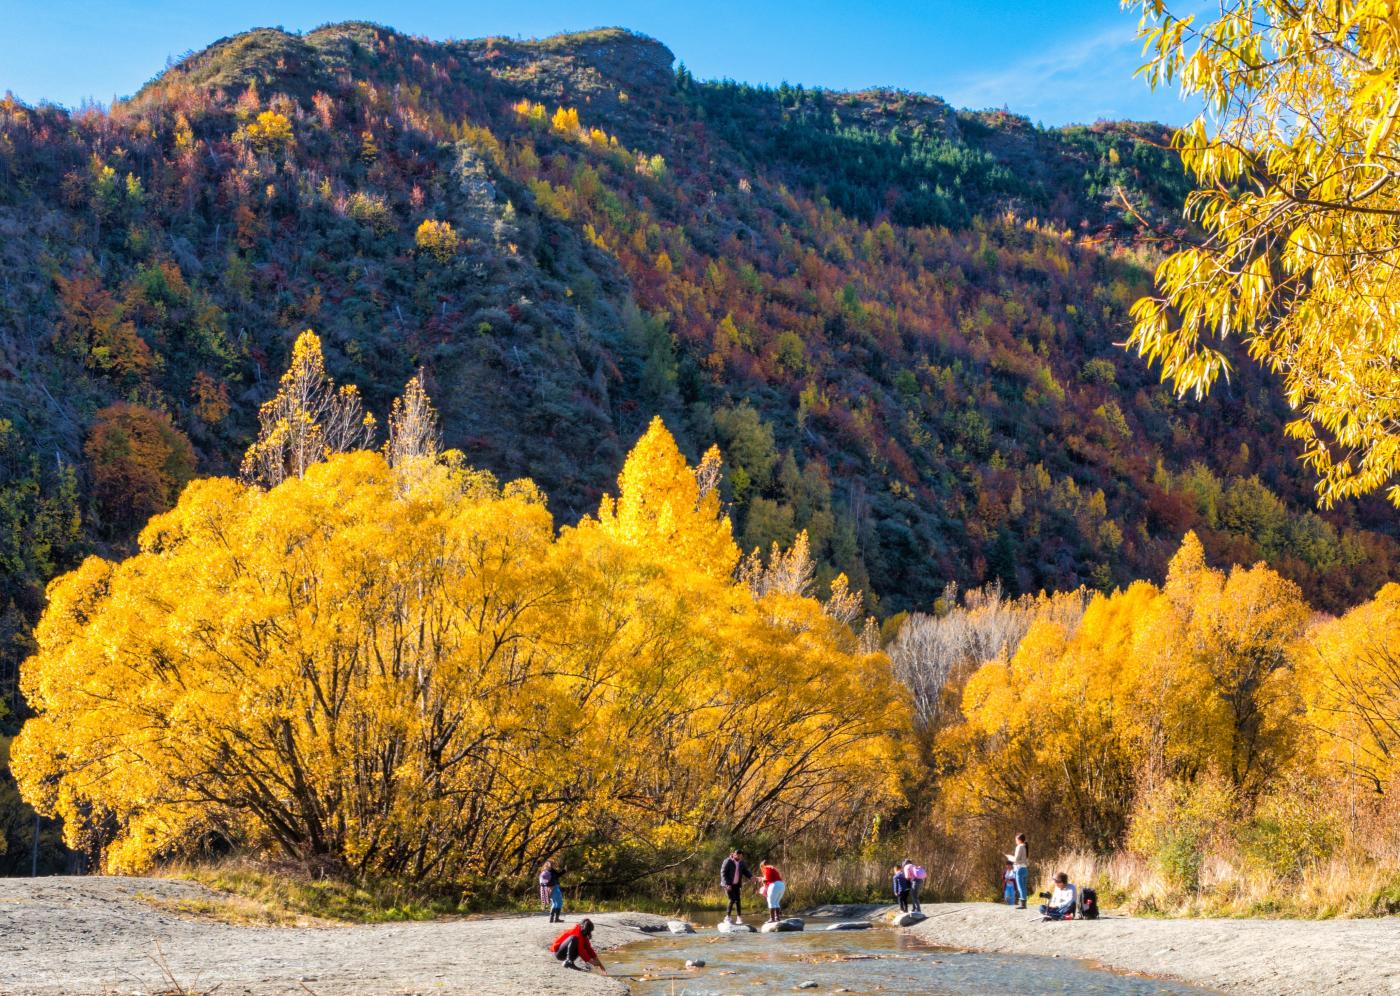 Gold panning in the Arrow River in Autumn